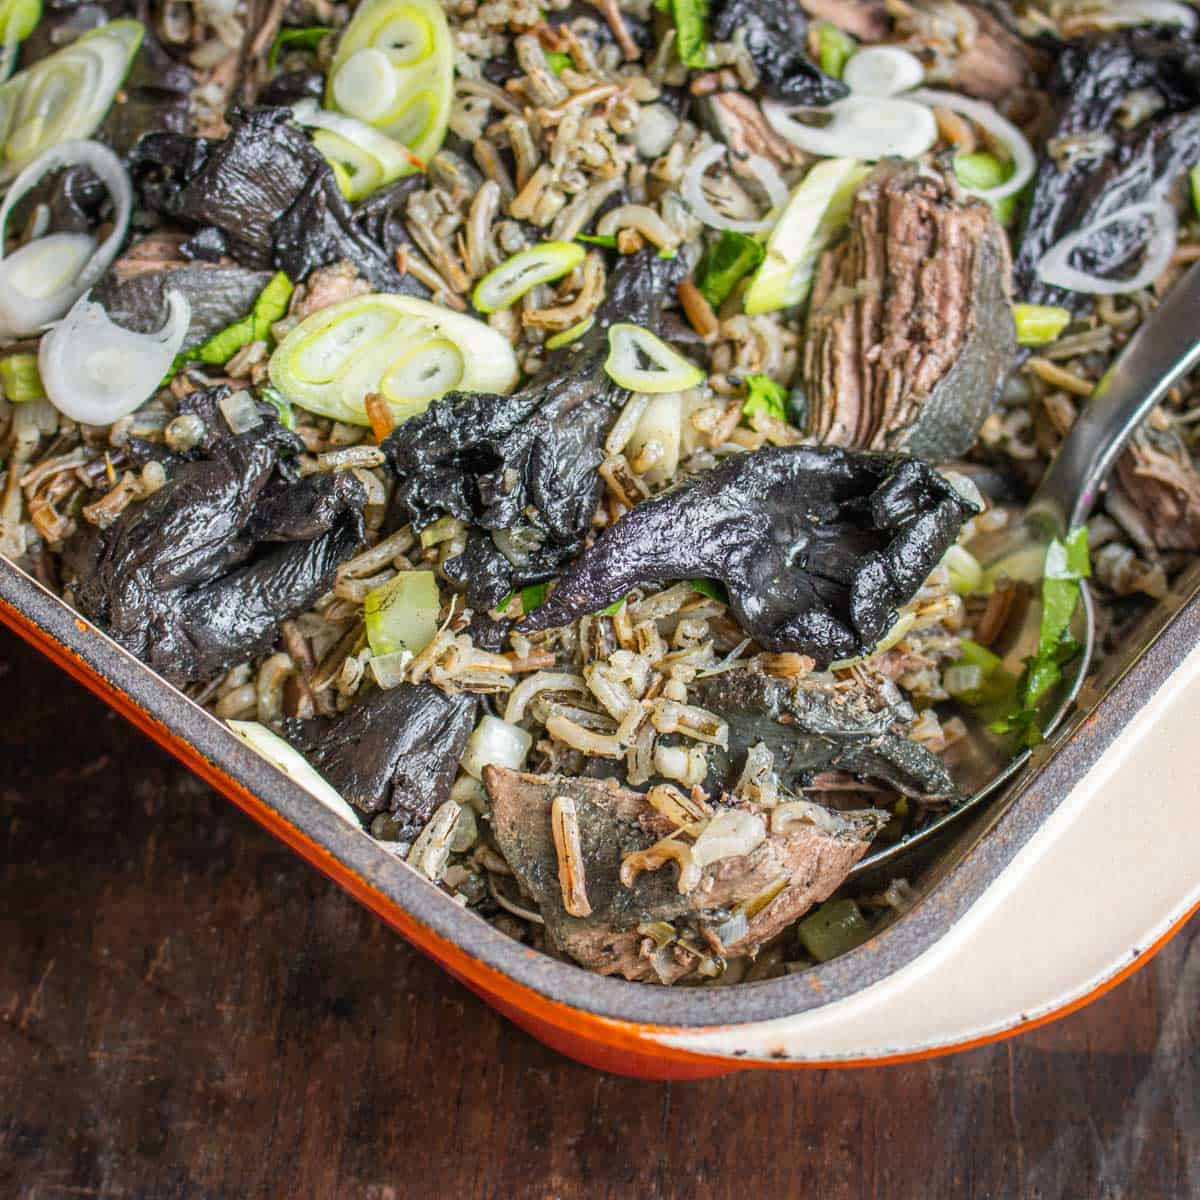 Parched wild rice with sharptail grouse, dried ramps, and blue chanterelles